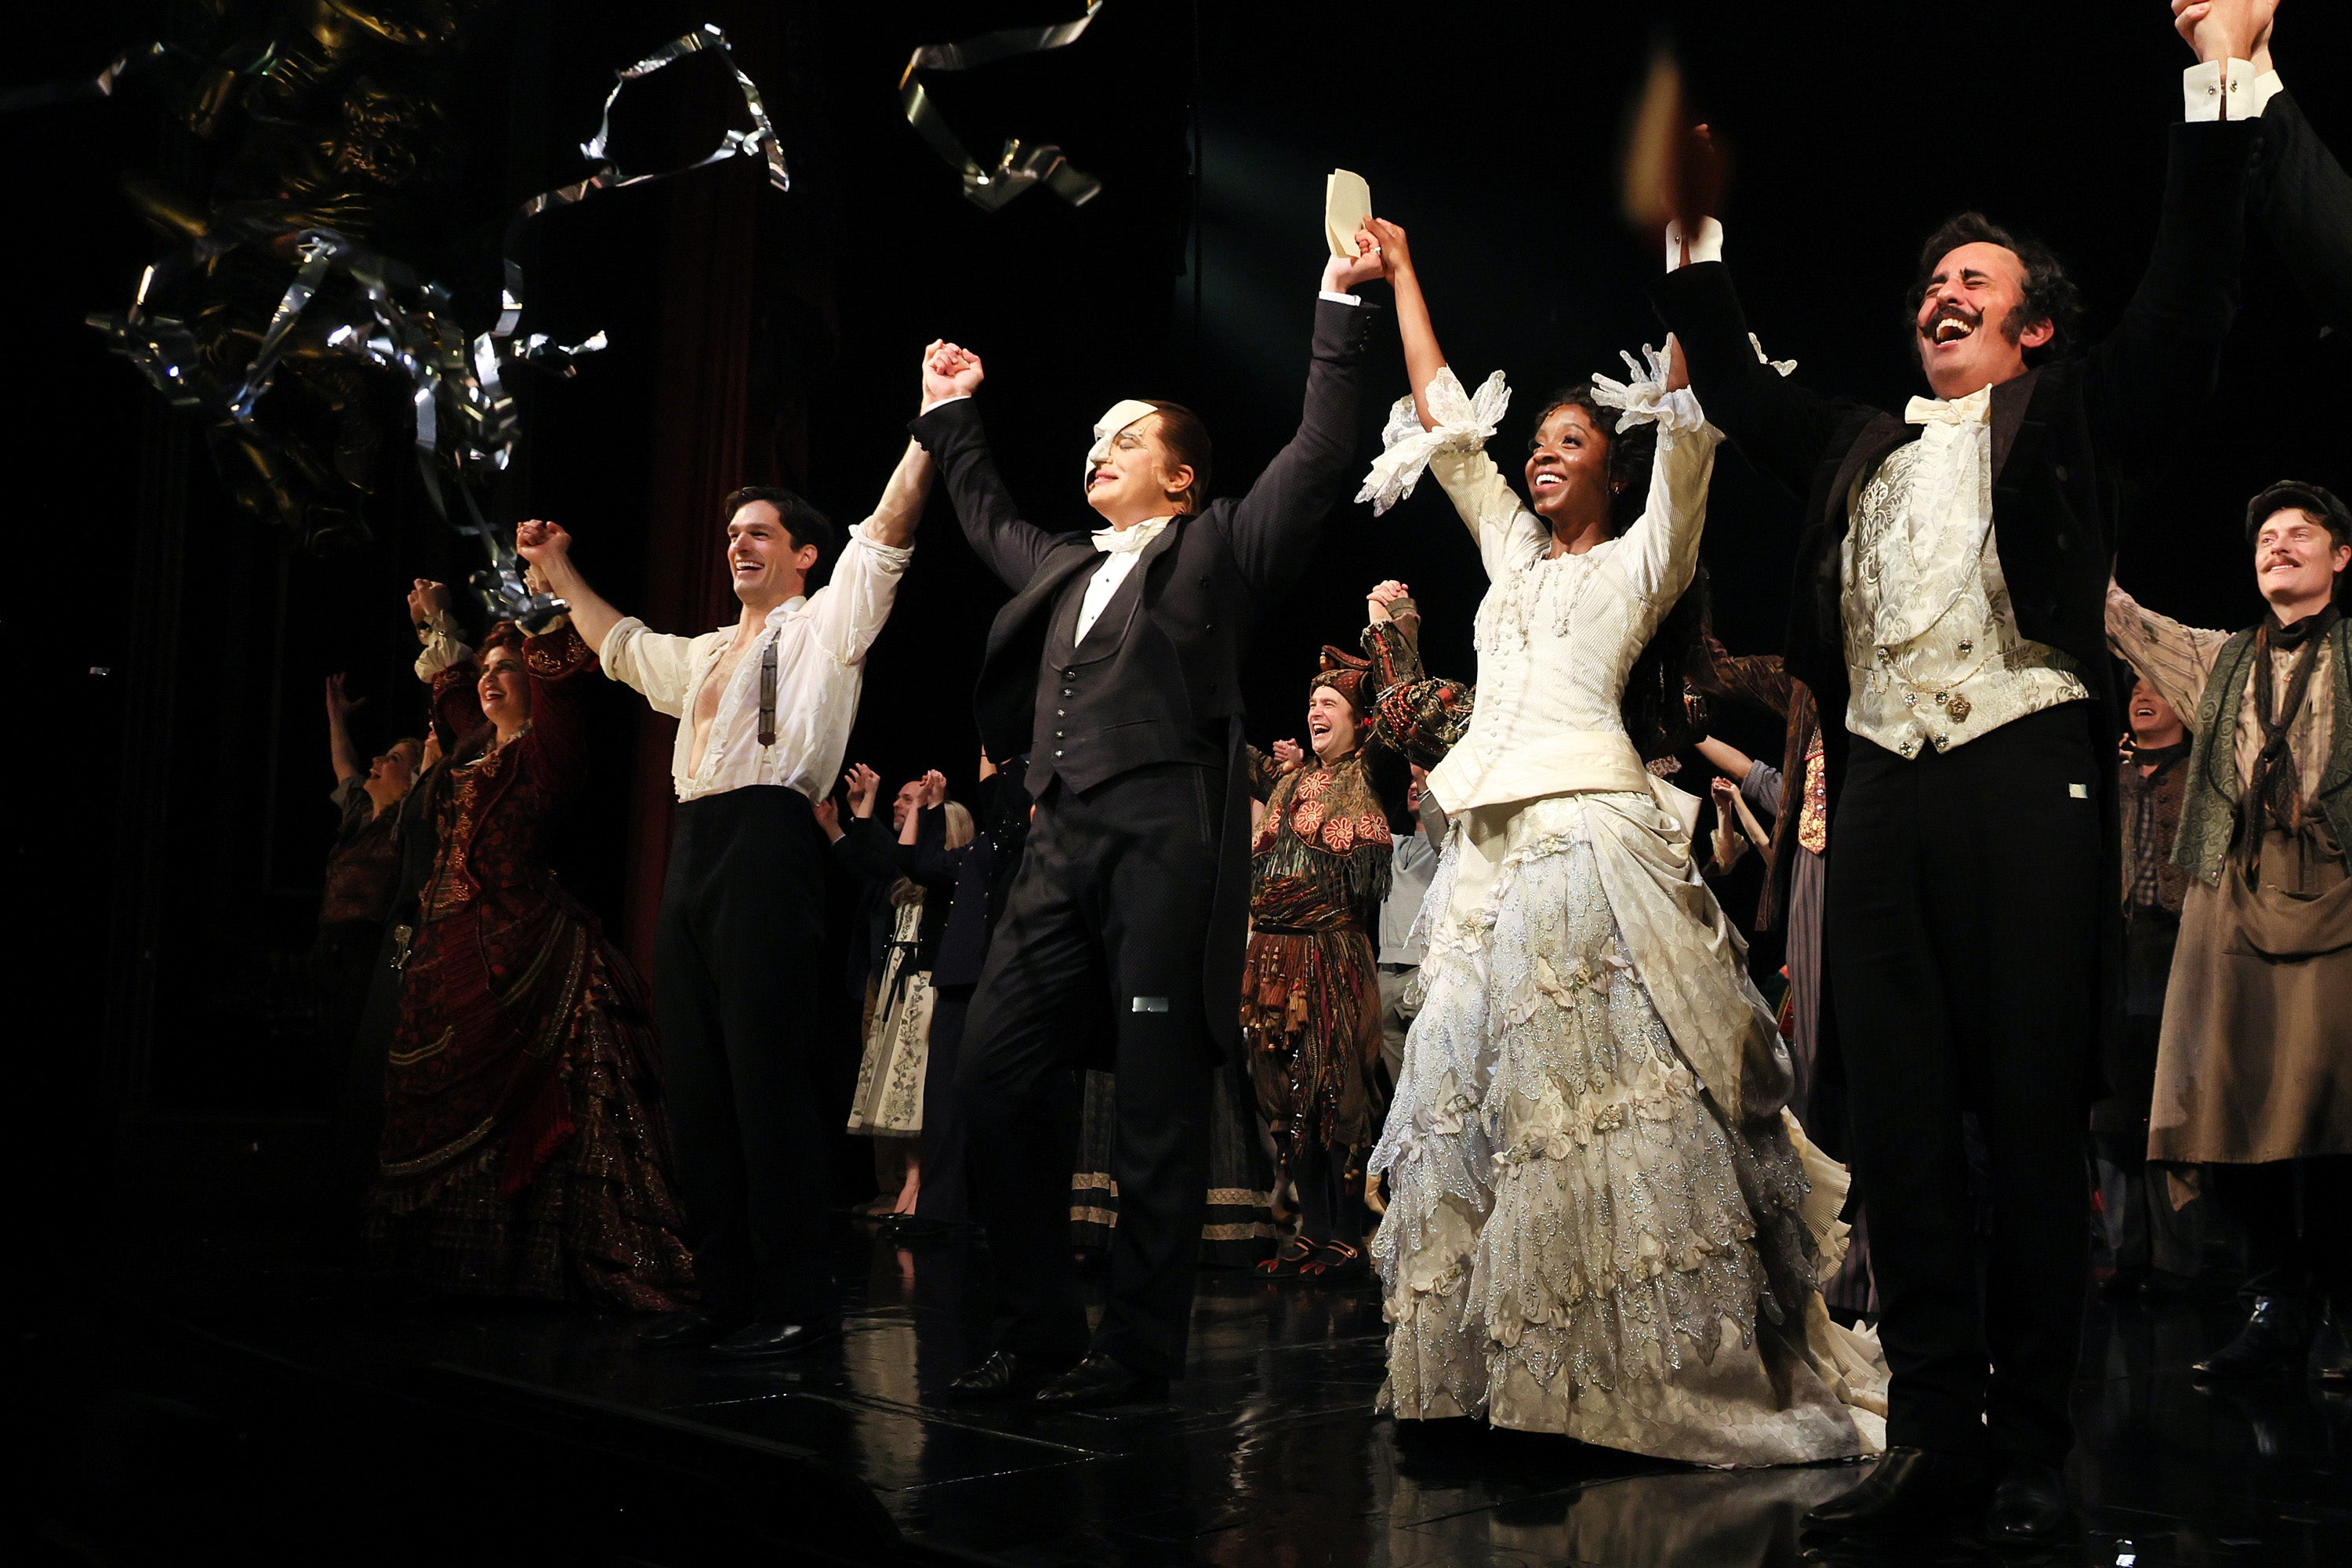 John Riddle as Raoul, Ben Crawford as The Phantom, and Emilie Kouatchou as Christine, and cast take their curtain call on the 35th anniversary of ‘The Phantom of the Opera’ on Broadway at the Majestic Theatre